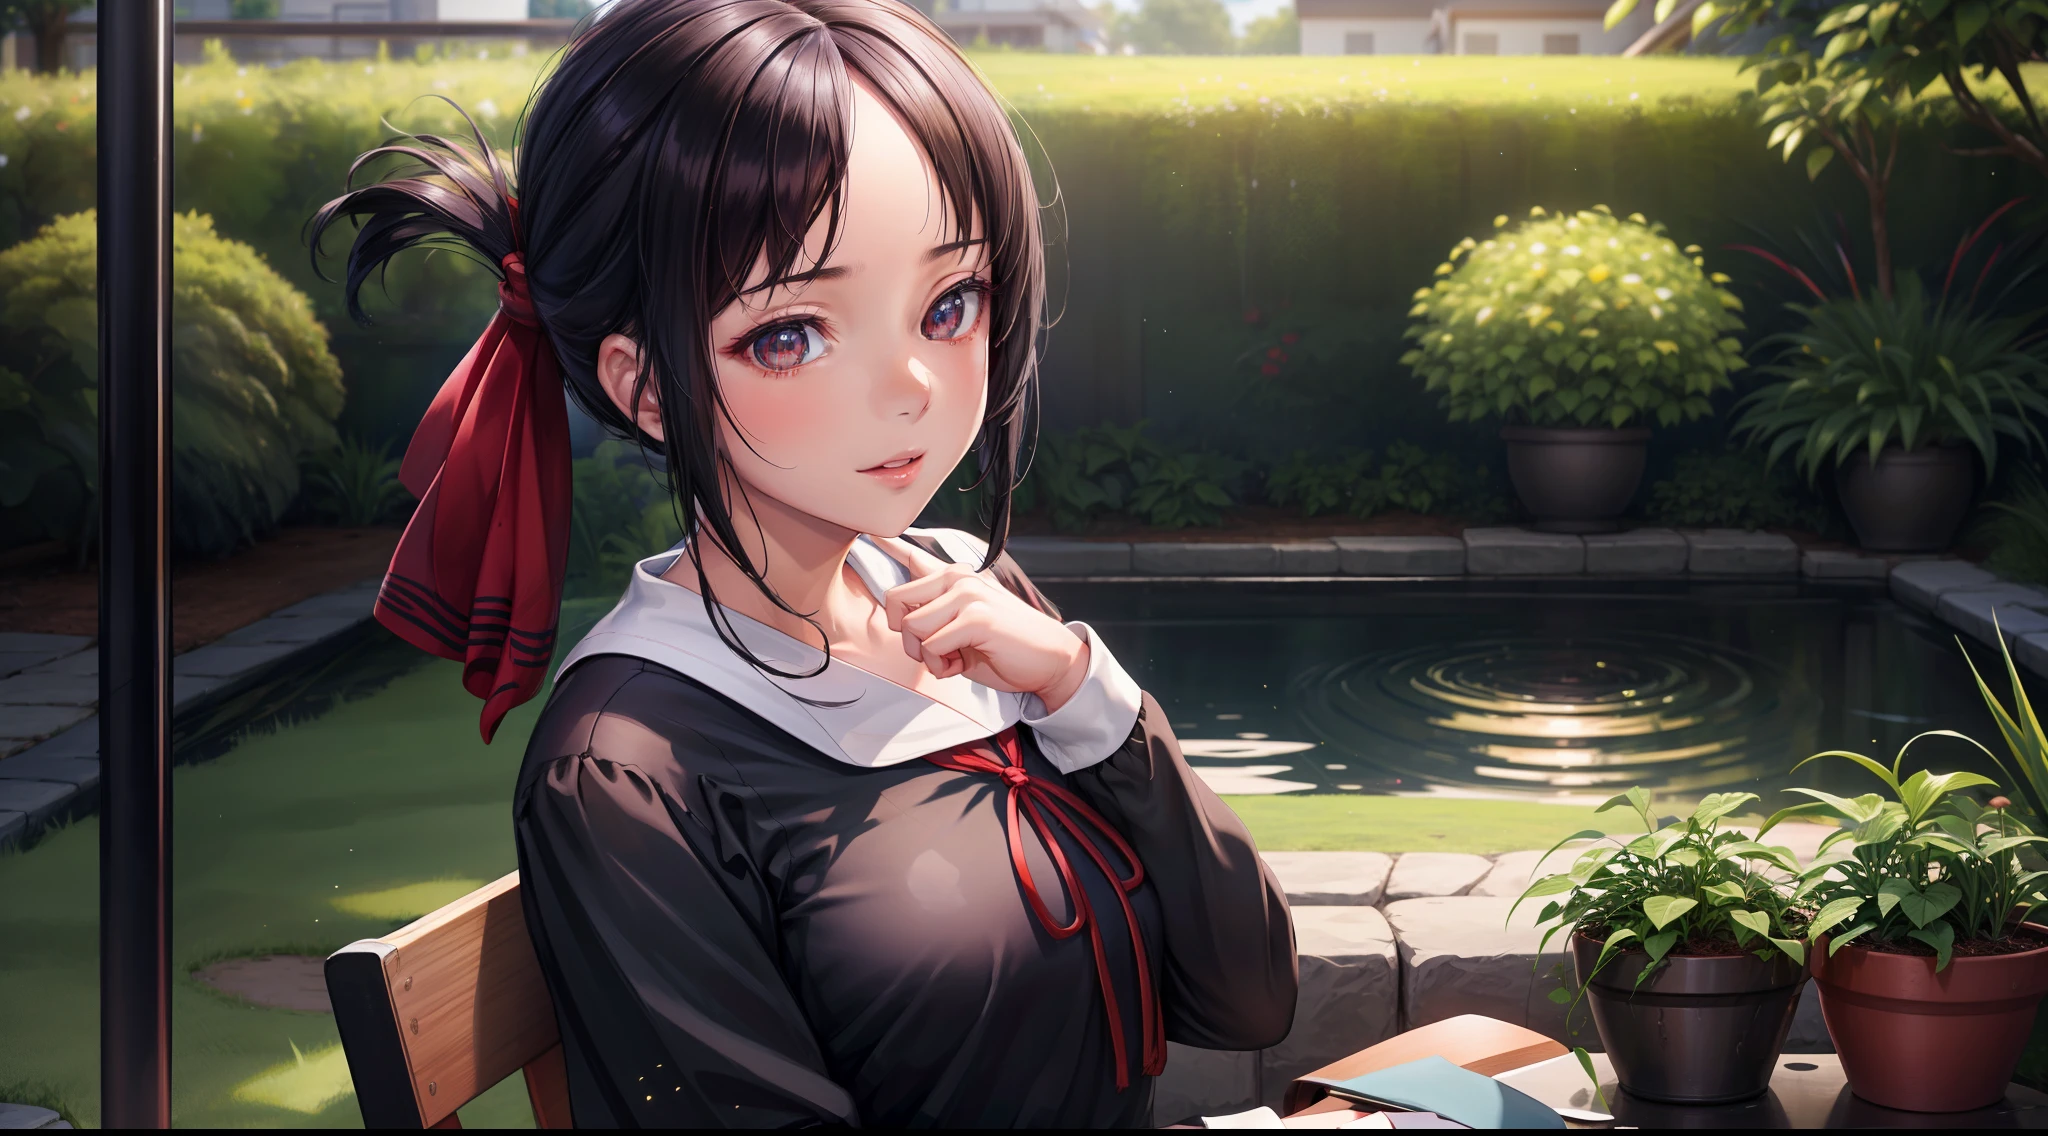 focused upper body, 1 girl, sitting pose, kaguya, school outfit, sparkling eyes, black hair, garden background, nice perfect face with soft skin, intricate detail, 8k resolution, masterpiece, 8k resolution photorealistic masterpiece, professional photography, natural lighting, detailed texture